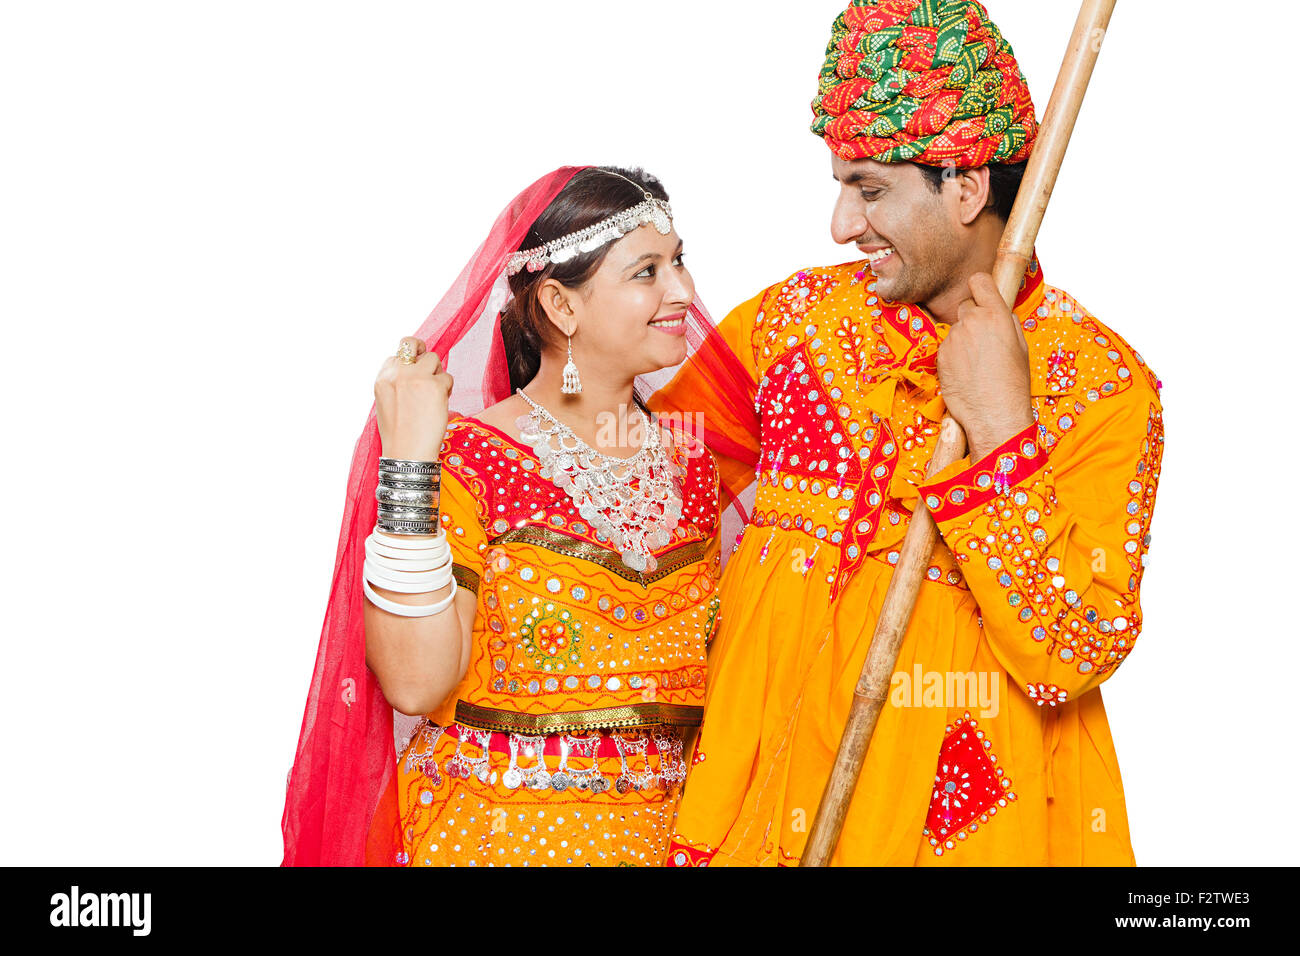 2 indian Rajasthani Villager Married Couple Romance Stock Photo